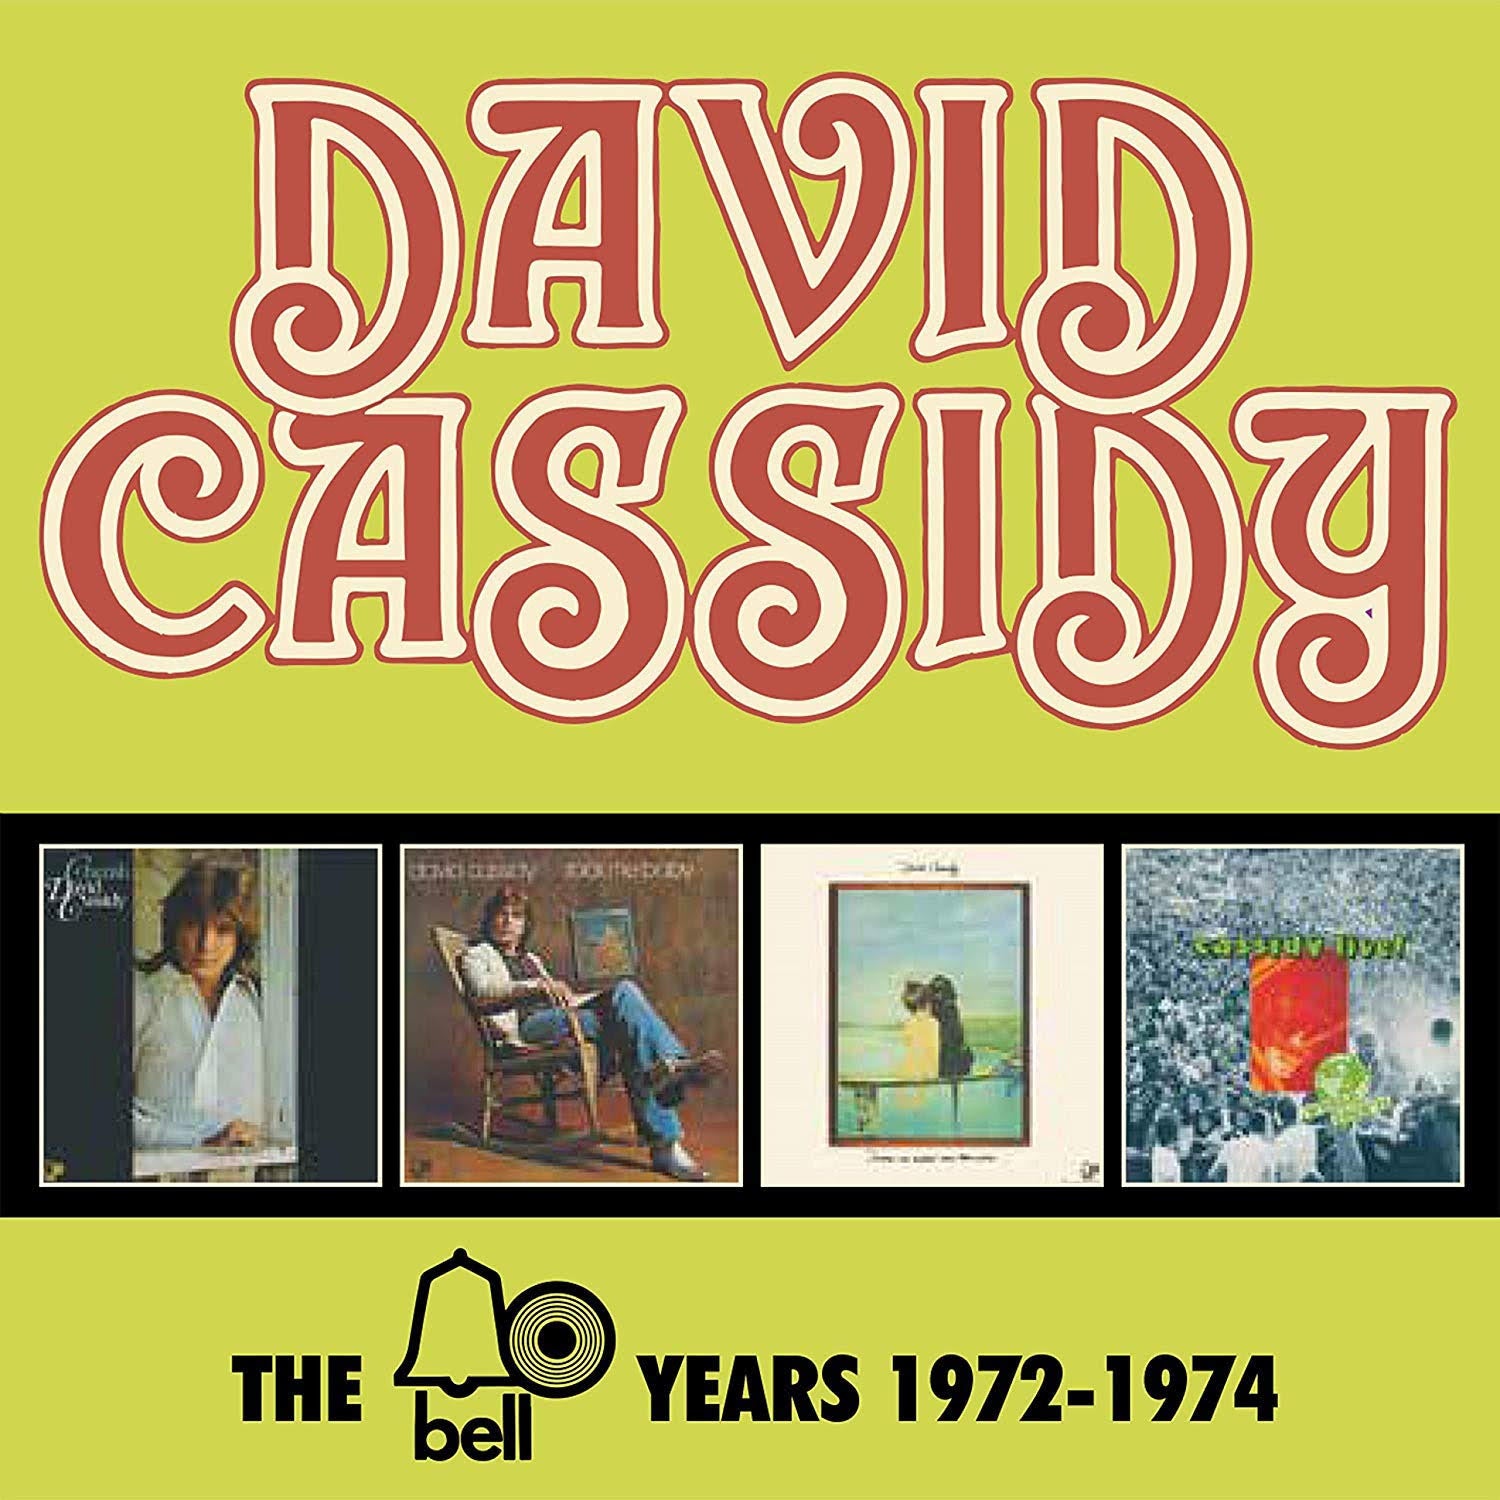 David Cassidy - The Bell Years 1972-1974 (4 CD Box Set - Imported)